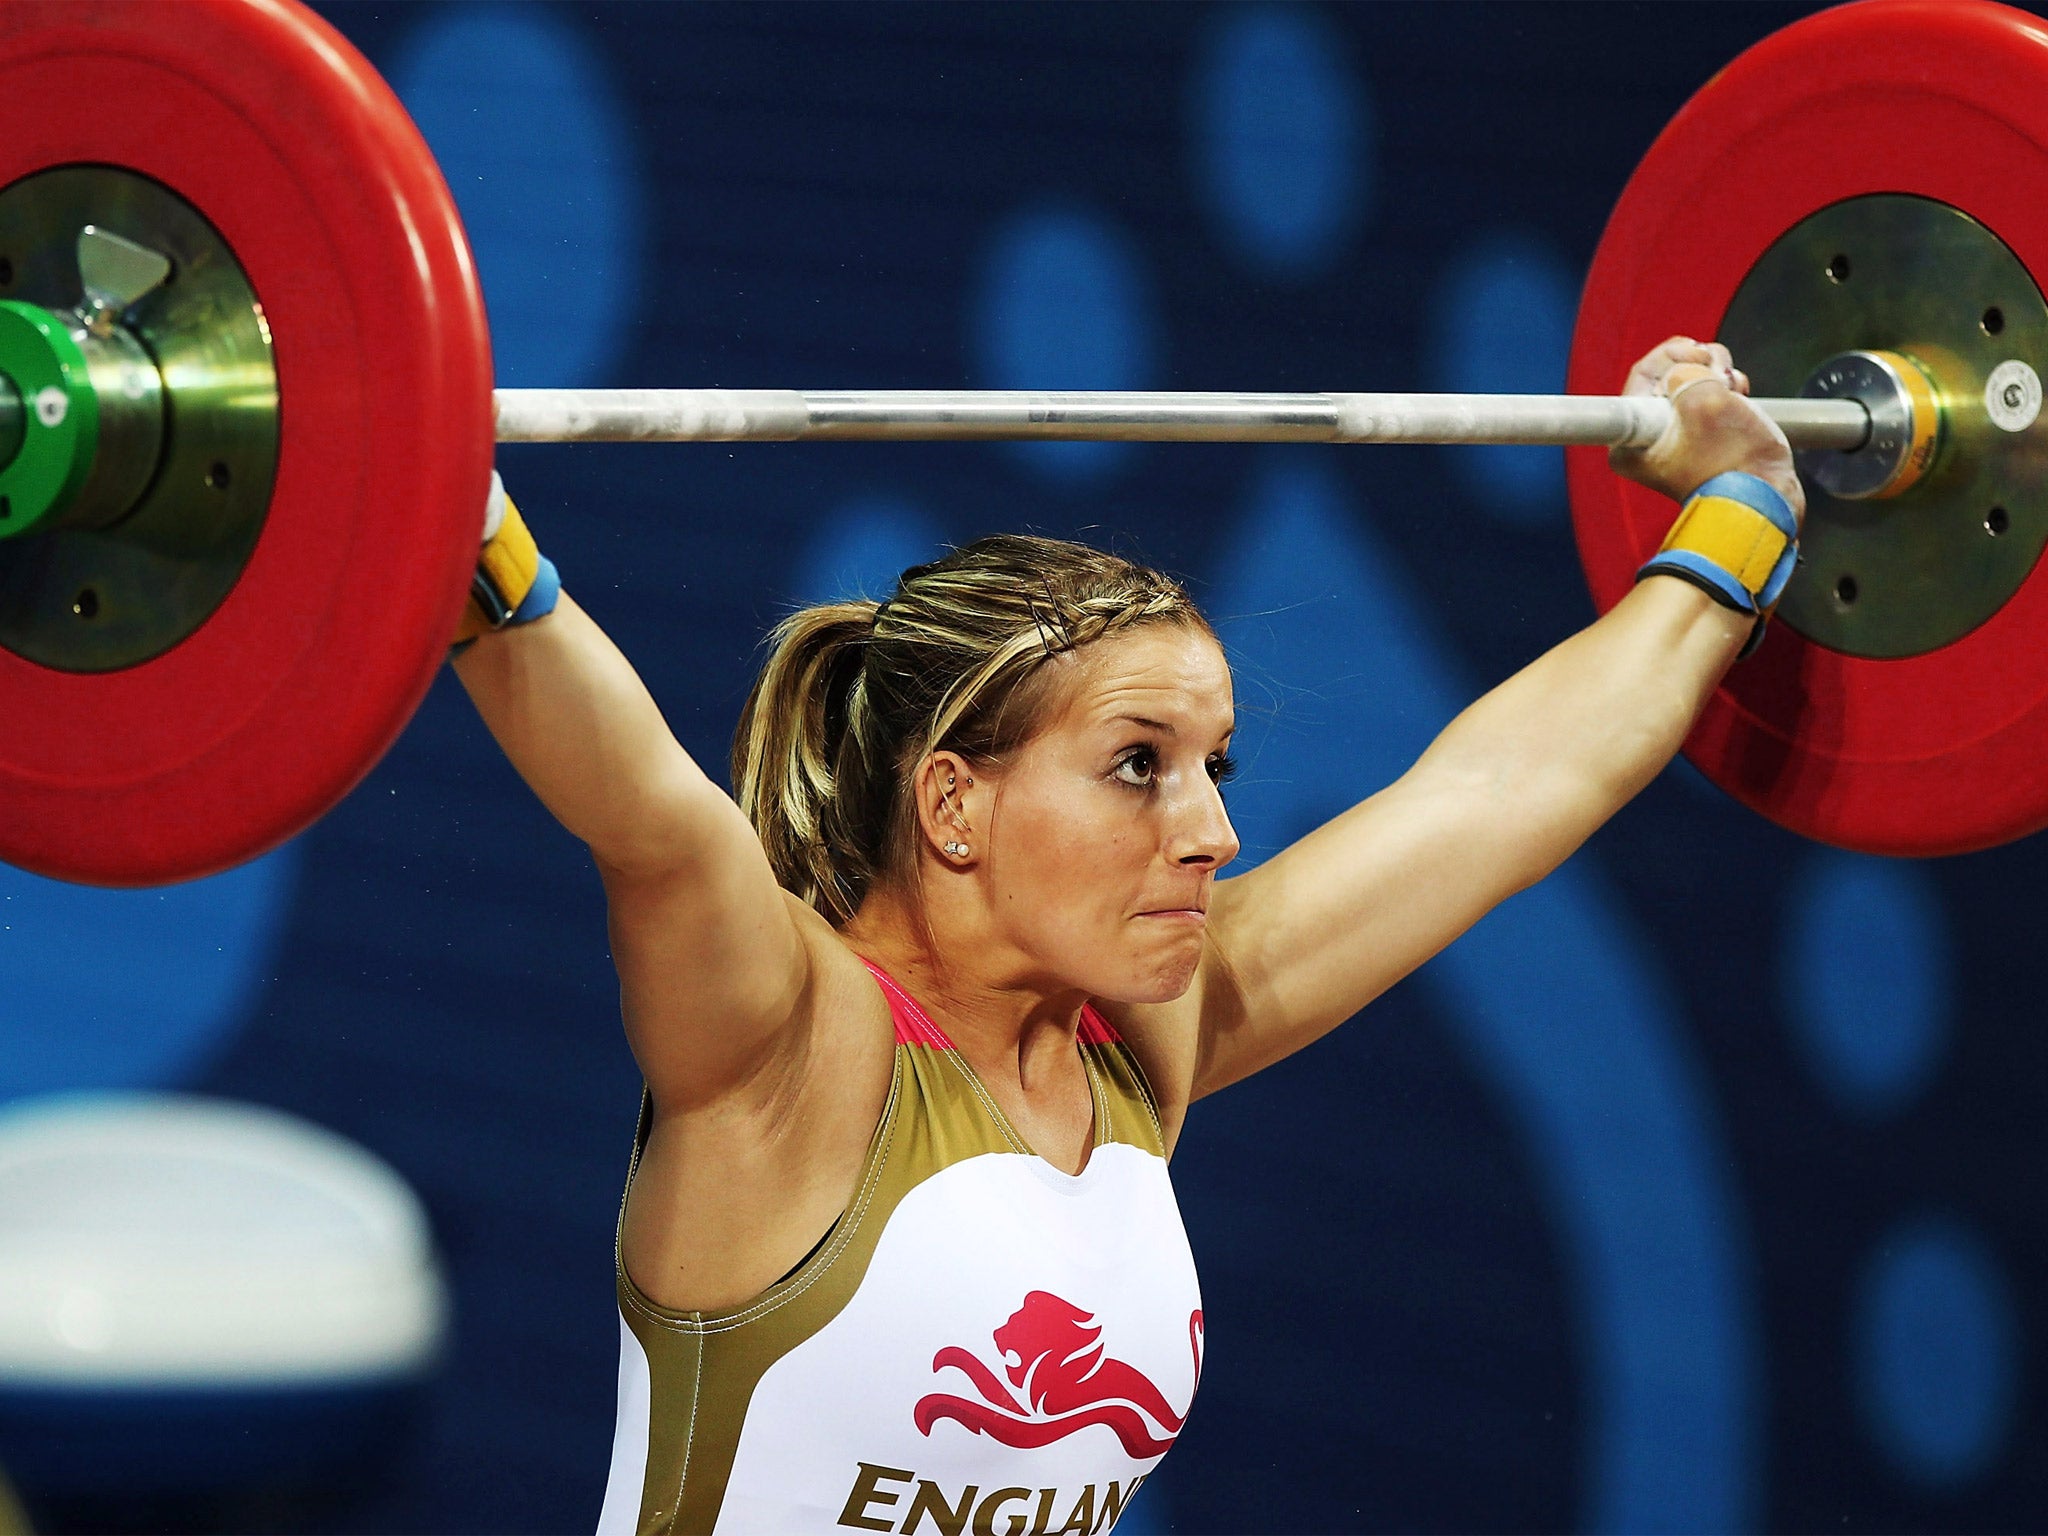 Emily Godley says the perception of weightlifting has changed in the five years she has been involved